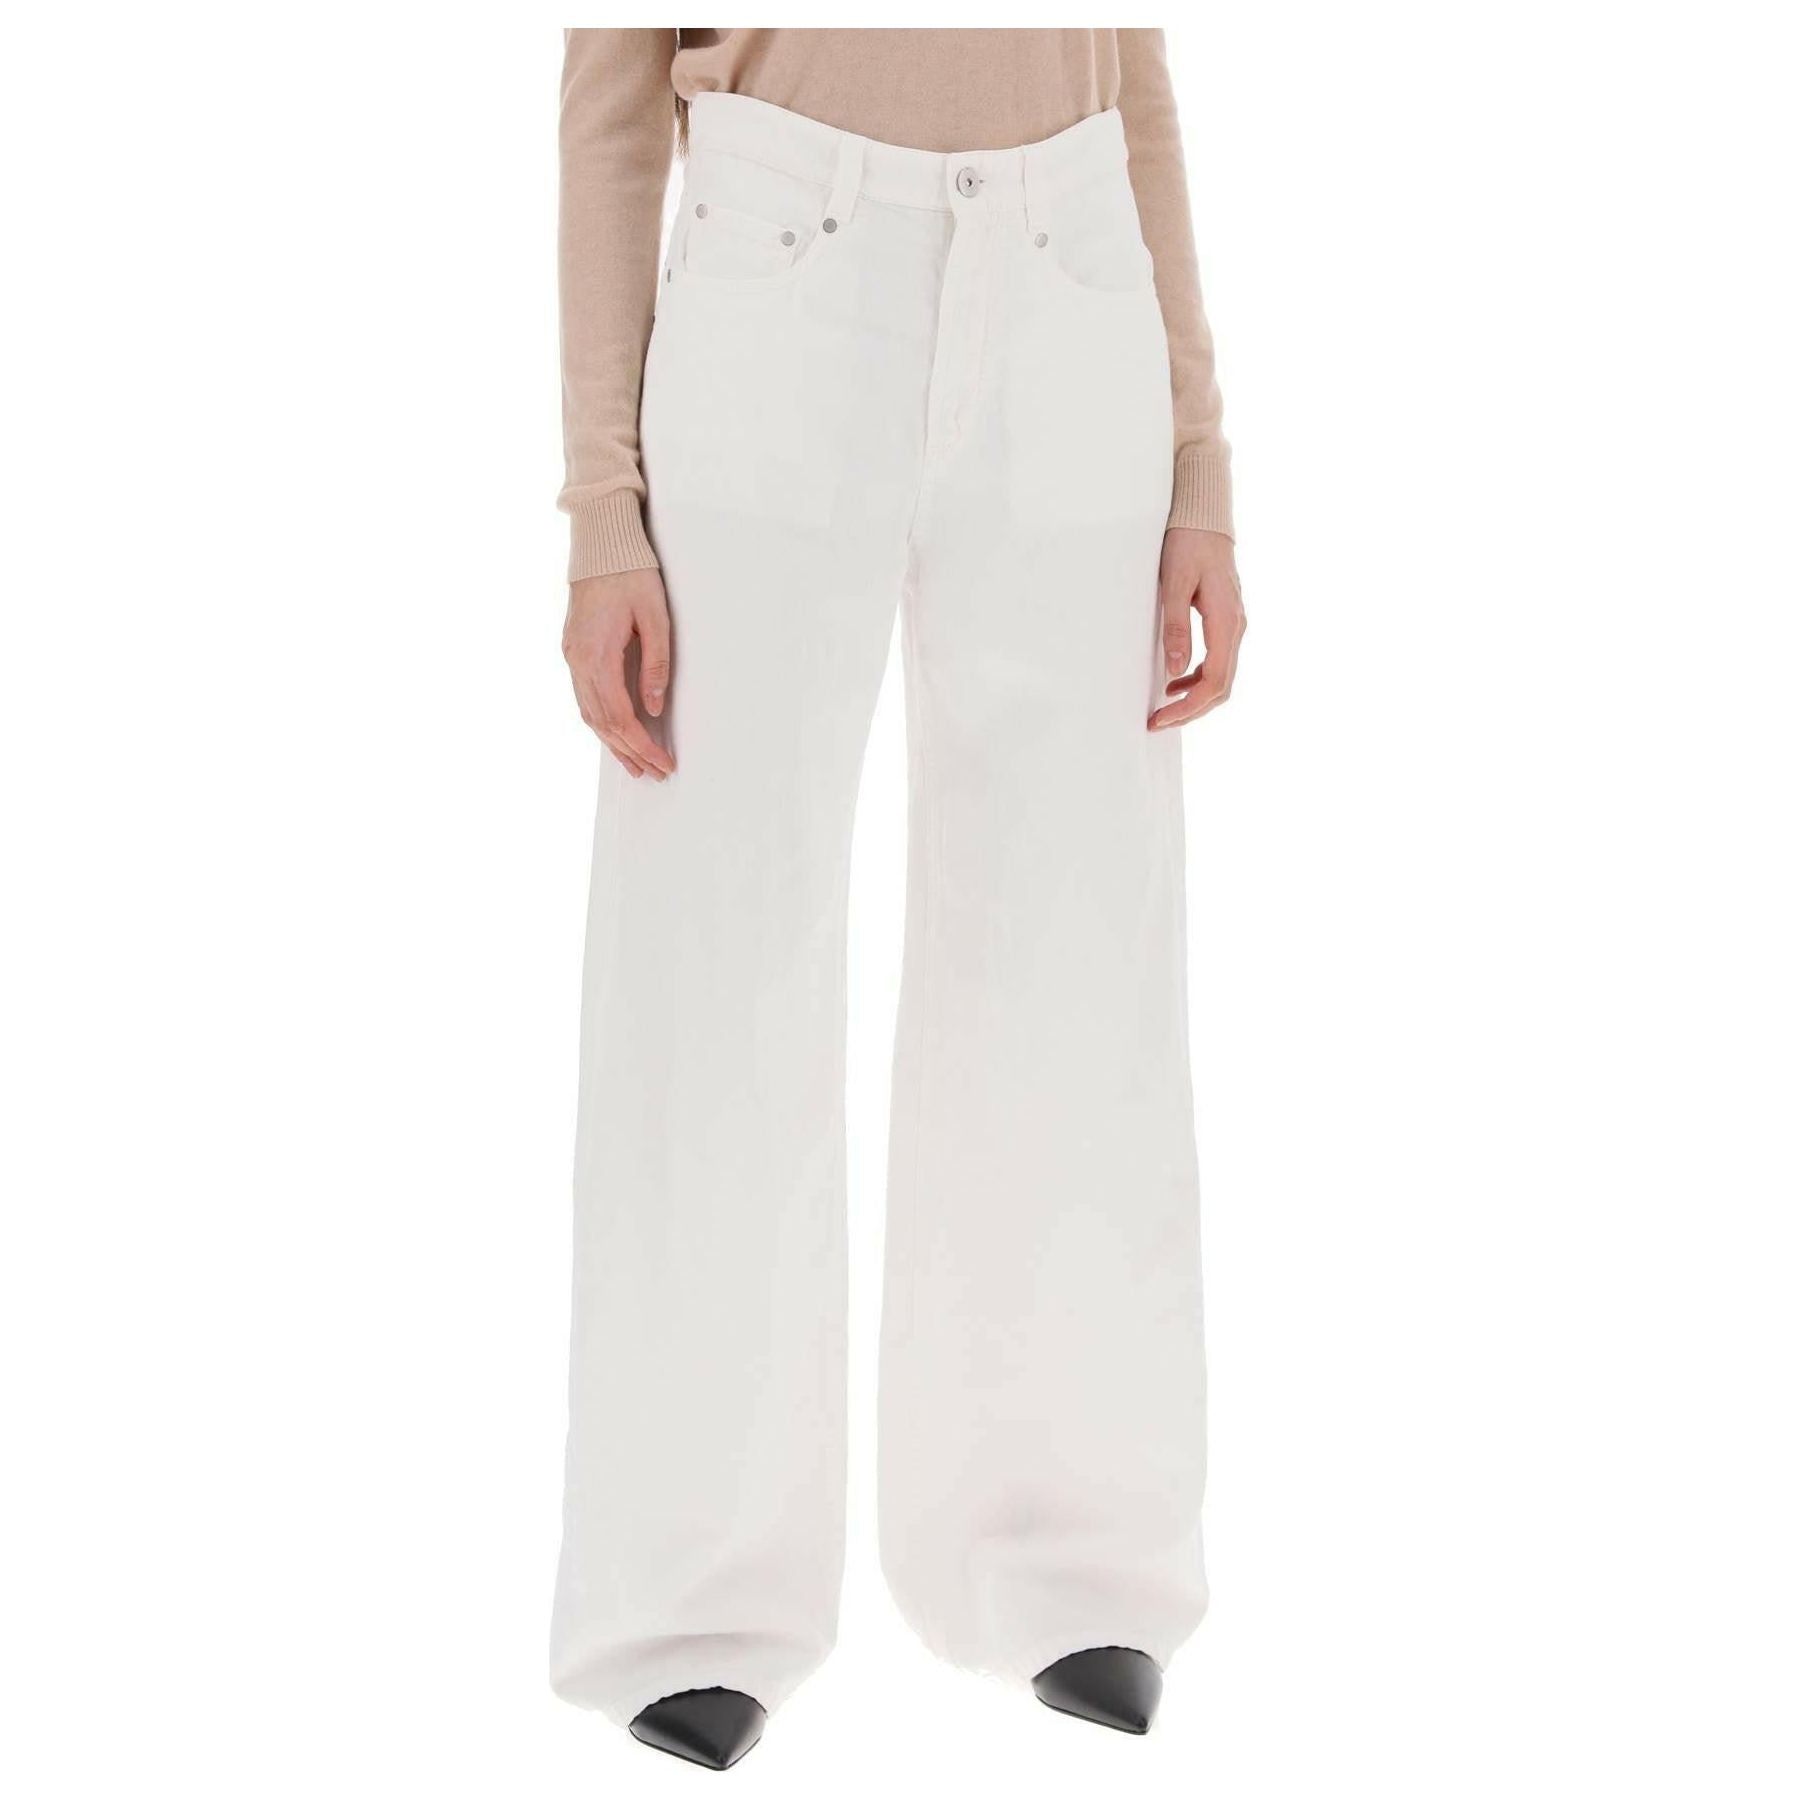 white Garment-Dyed Cotton and Linen Relaxed Trousers BRUNELLO CUCINELLI JOHN JULIA.